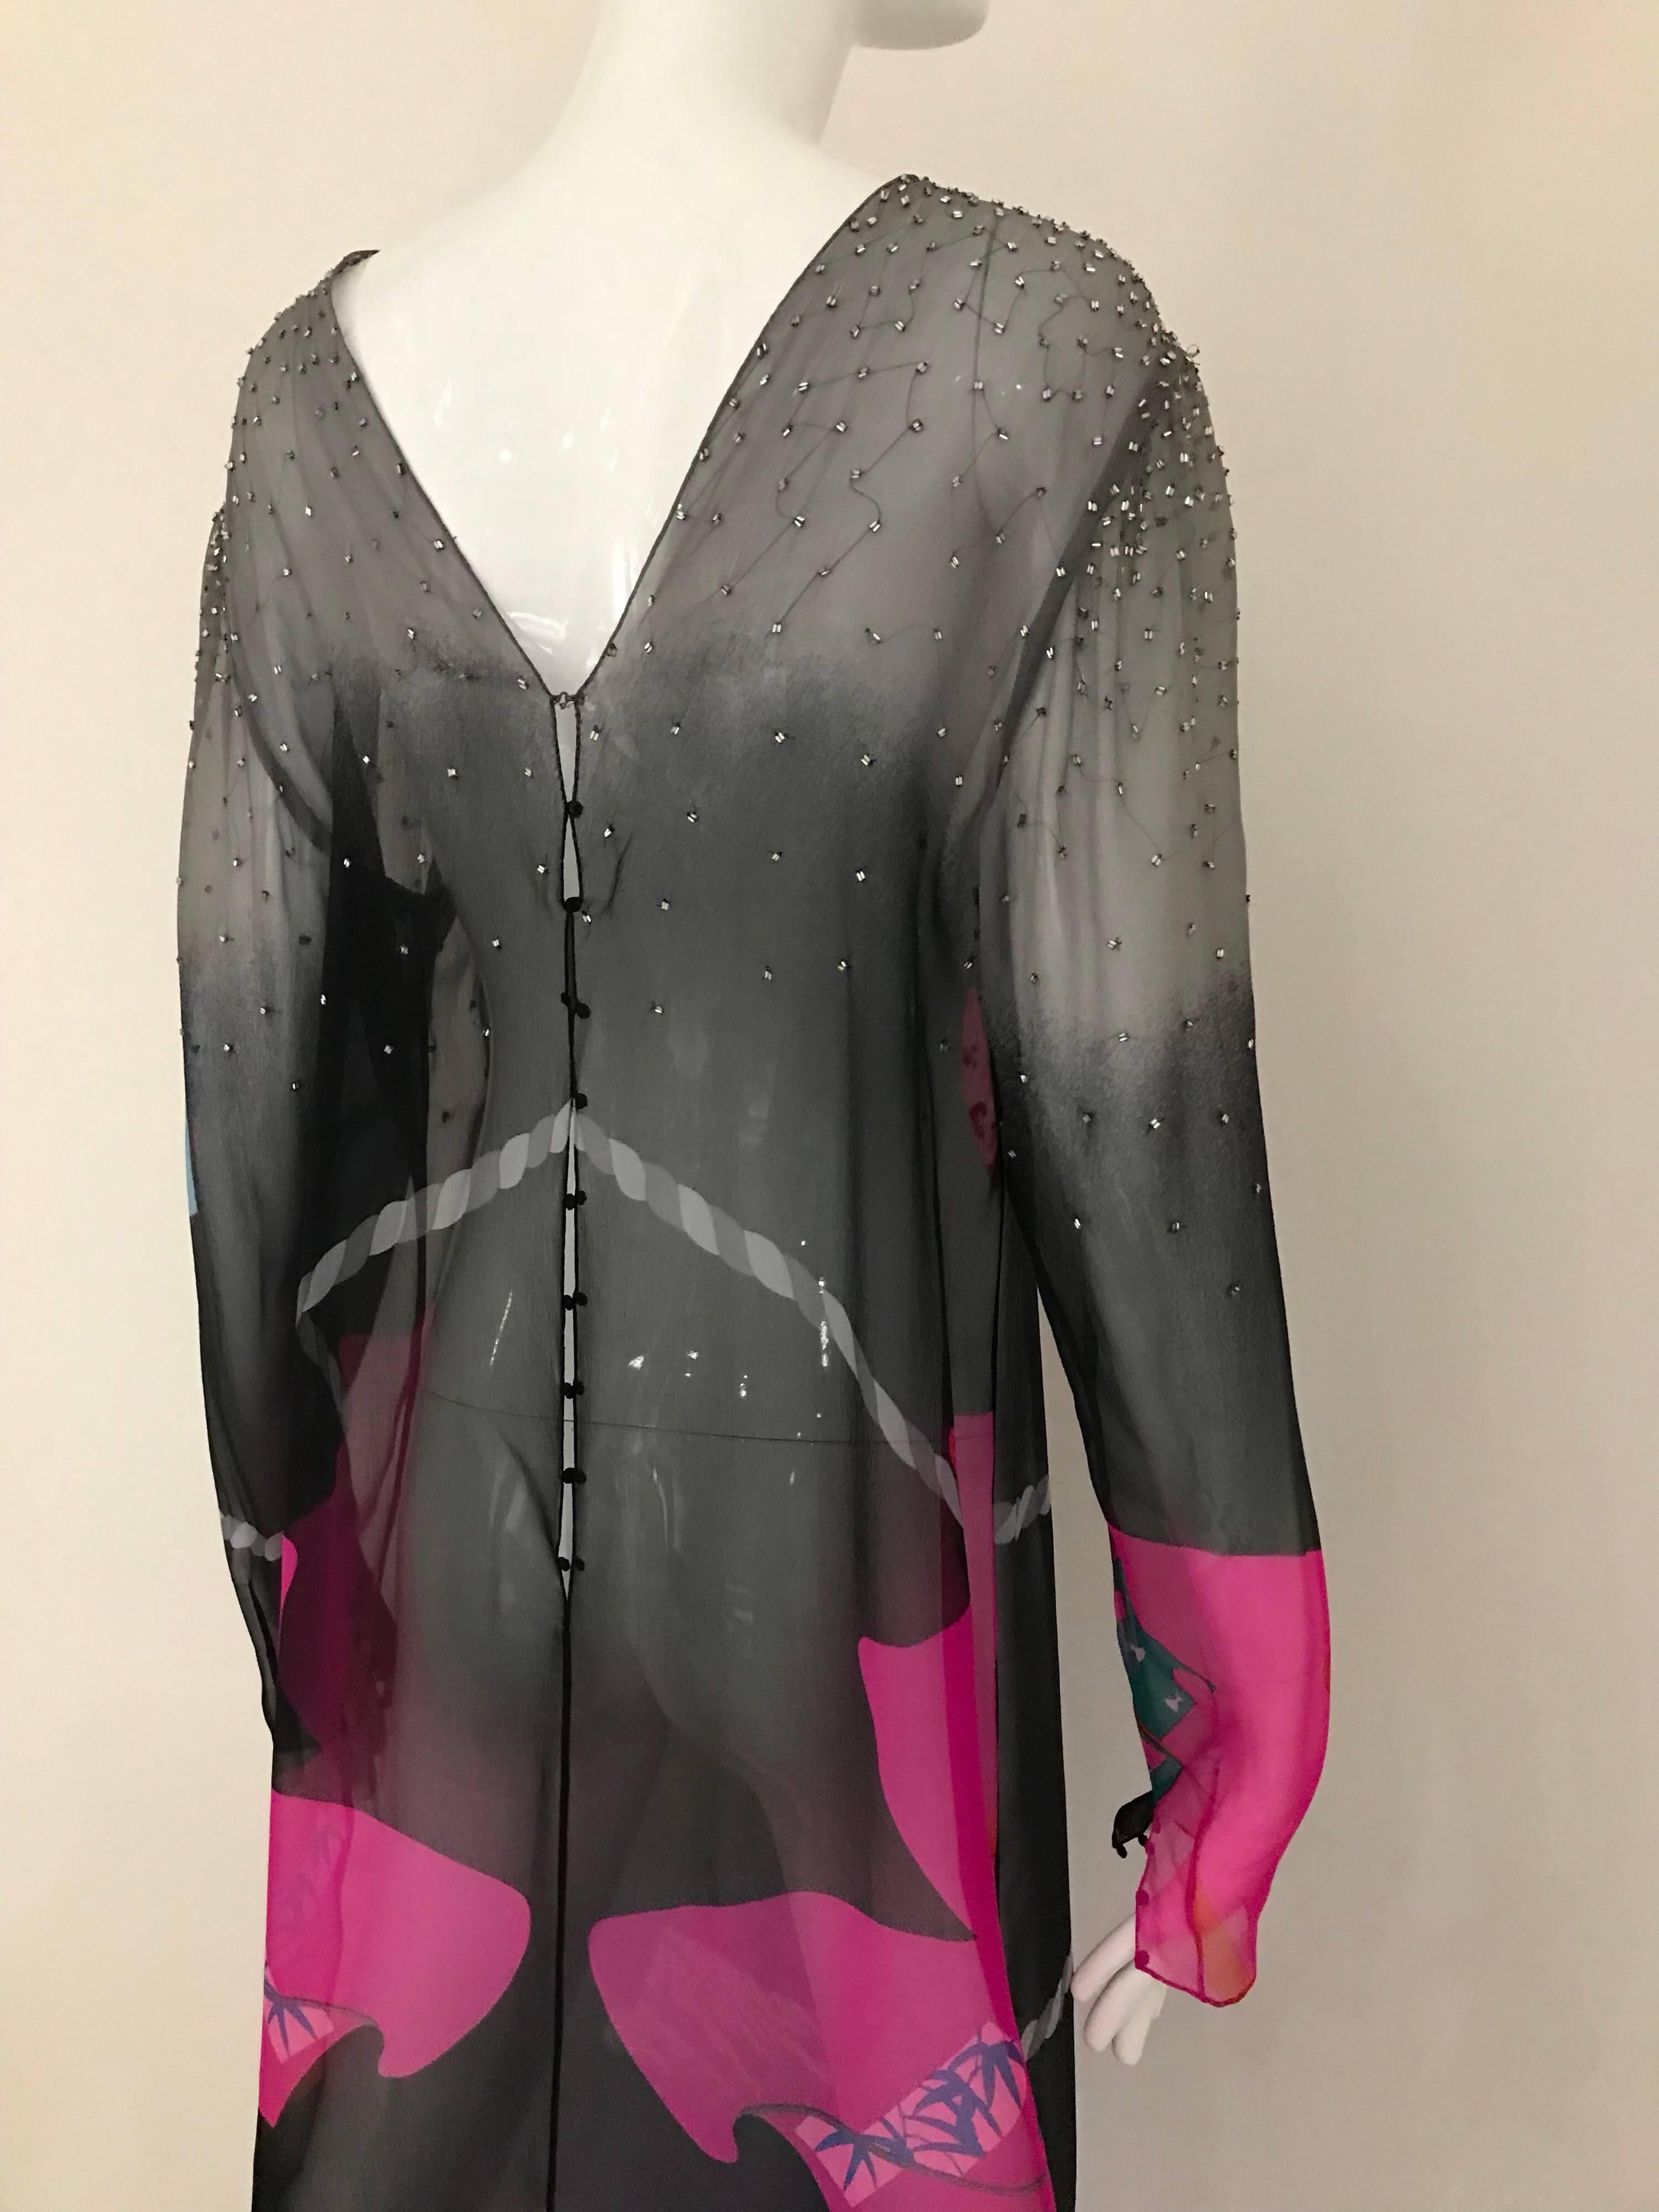 Vintage Hanae Mori Black and Pink Abstract Print Dress Skirt Ensemble In Excellent Condition For Sale In Beverly Hills, CA